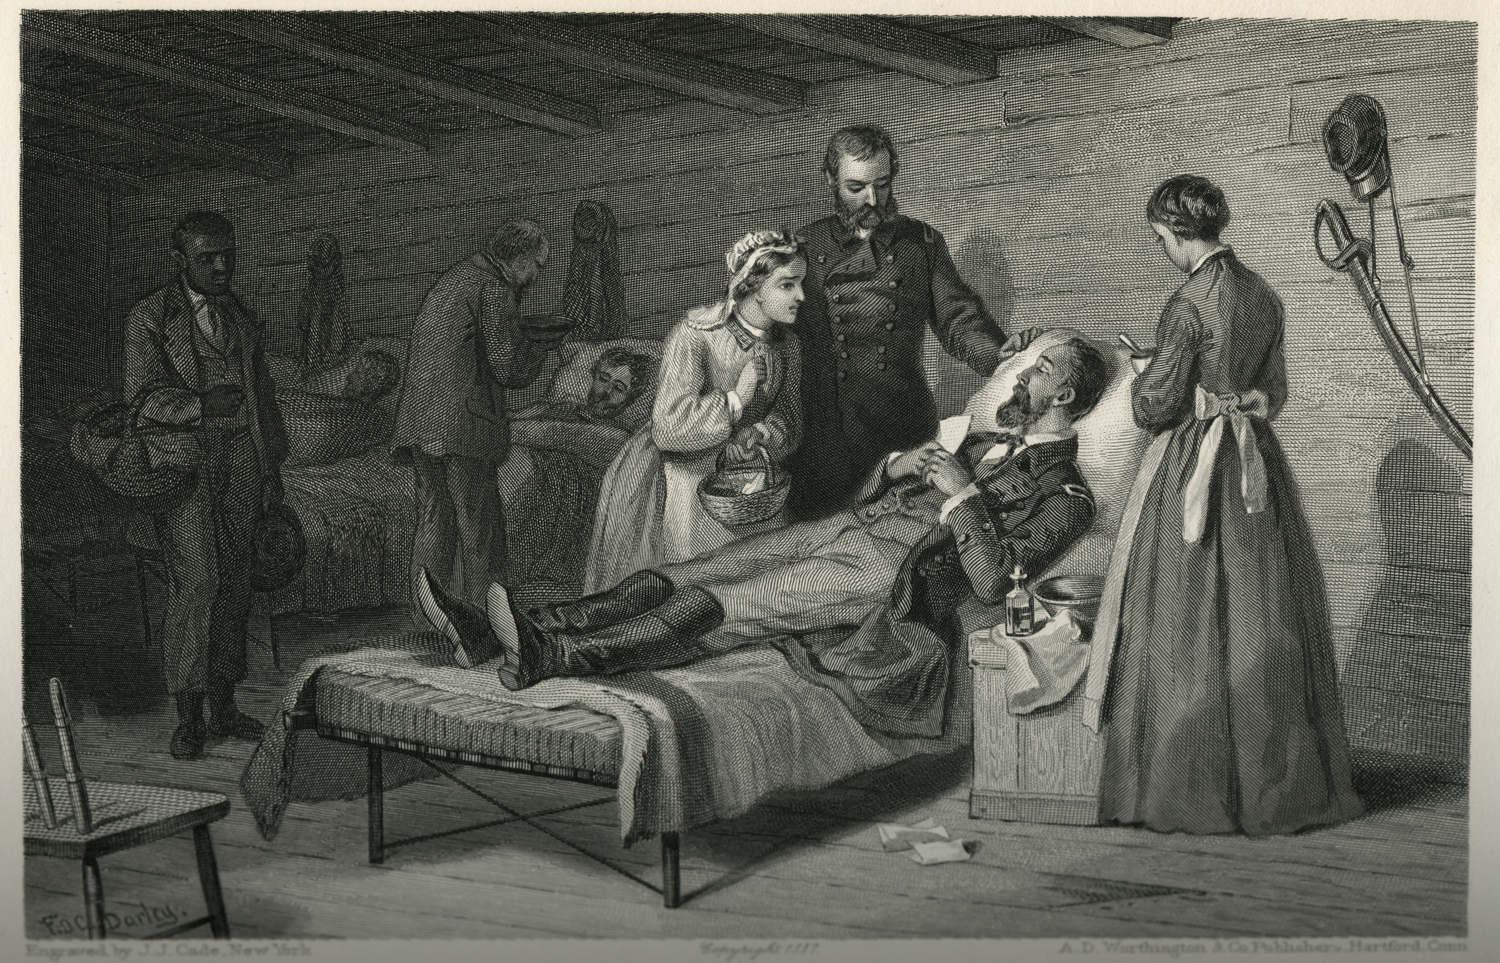 Felix Octavius Carr Darley and John J. Cade, The Dying Soldier - The Last Letter from Home 1887, engraving from a sketch from Mary A. Livermore, My Story of the War: A Woman's Narrative of Four Years Personal Experience, Hartford: A.D. Worthingon and Company, 1889, p. 211 (Newberry Library)